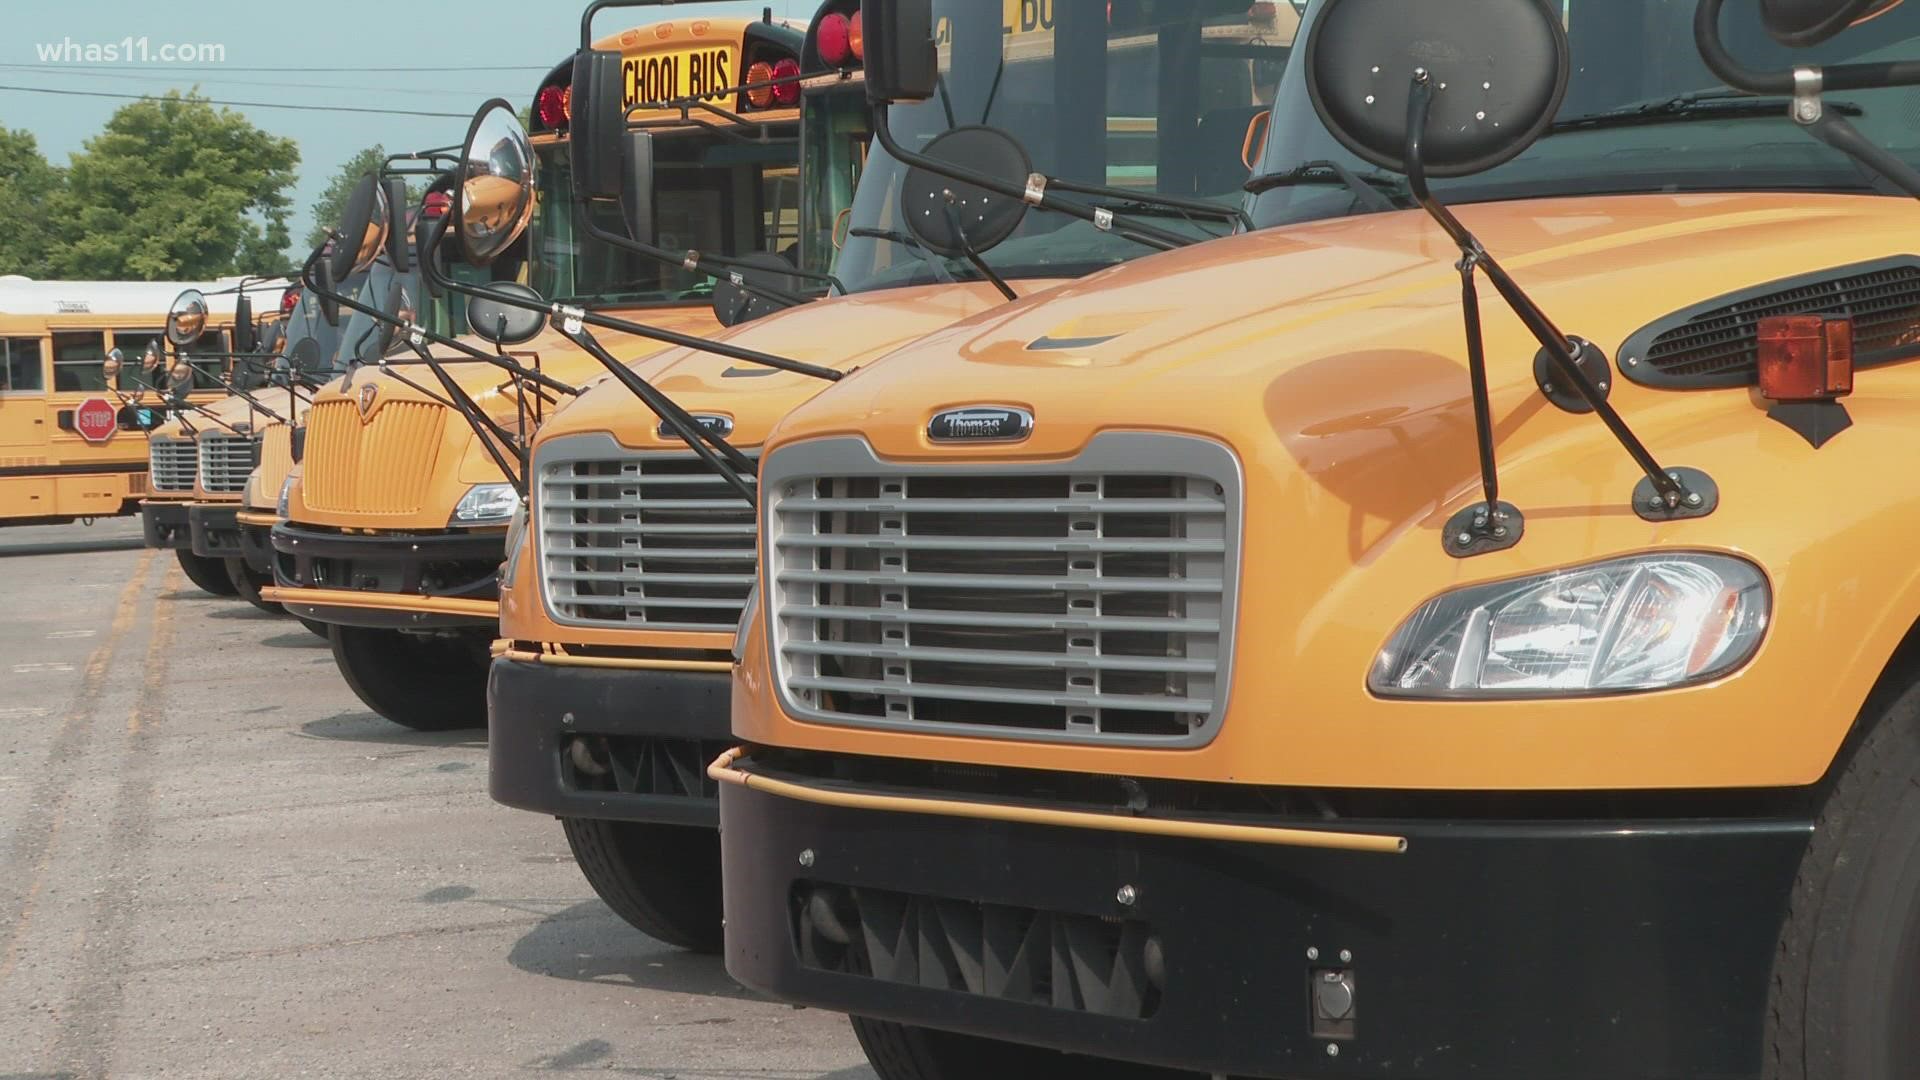 Jefferson County Public Schools (JCPS) unveiled their latest transportation plans for the more than 65,000 students traveling to and from school this upcoming year.